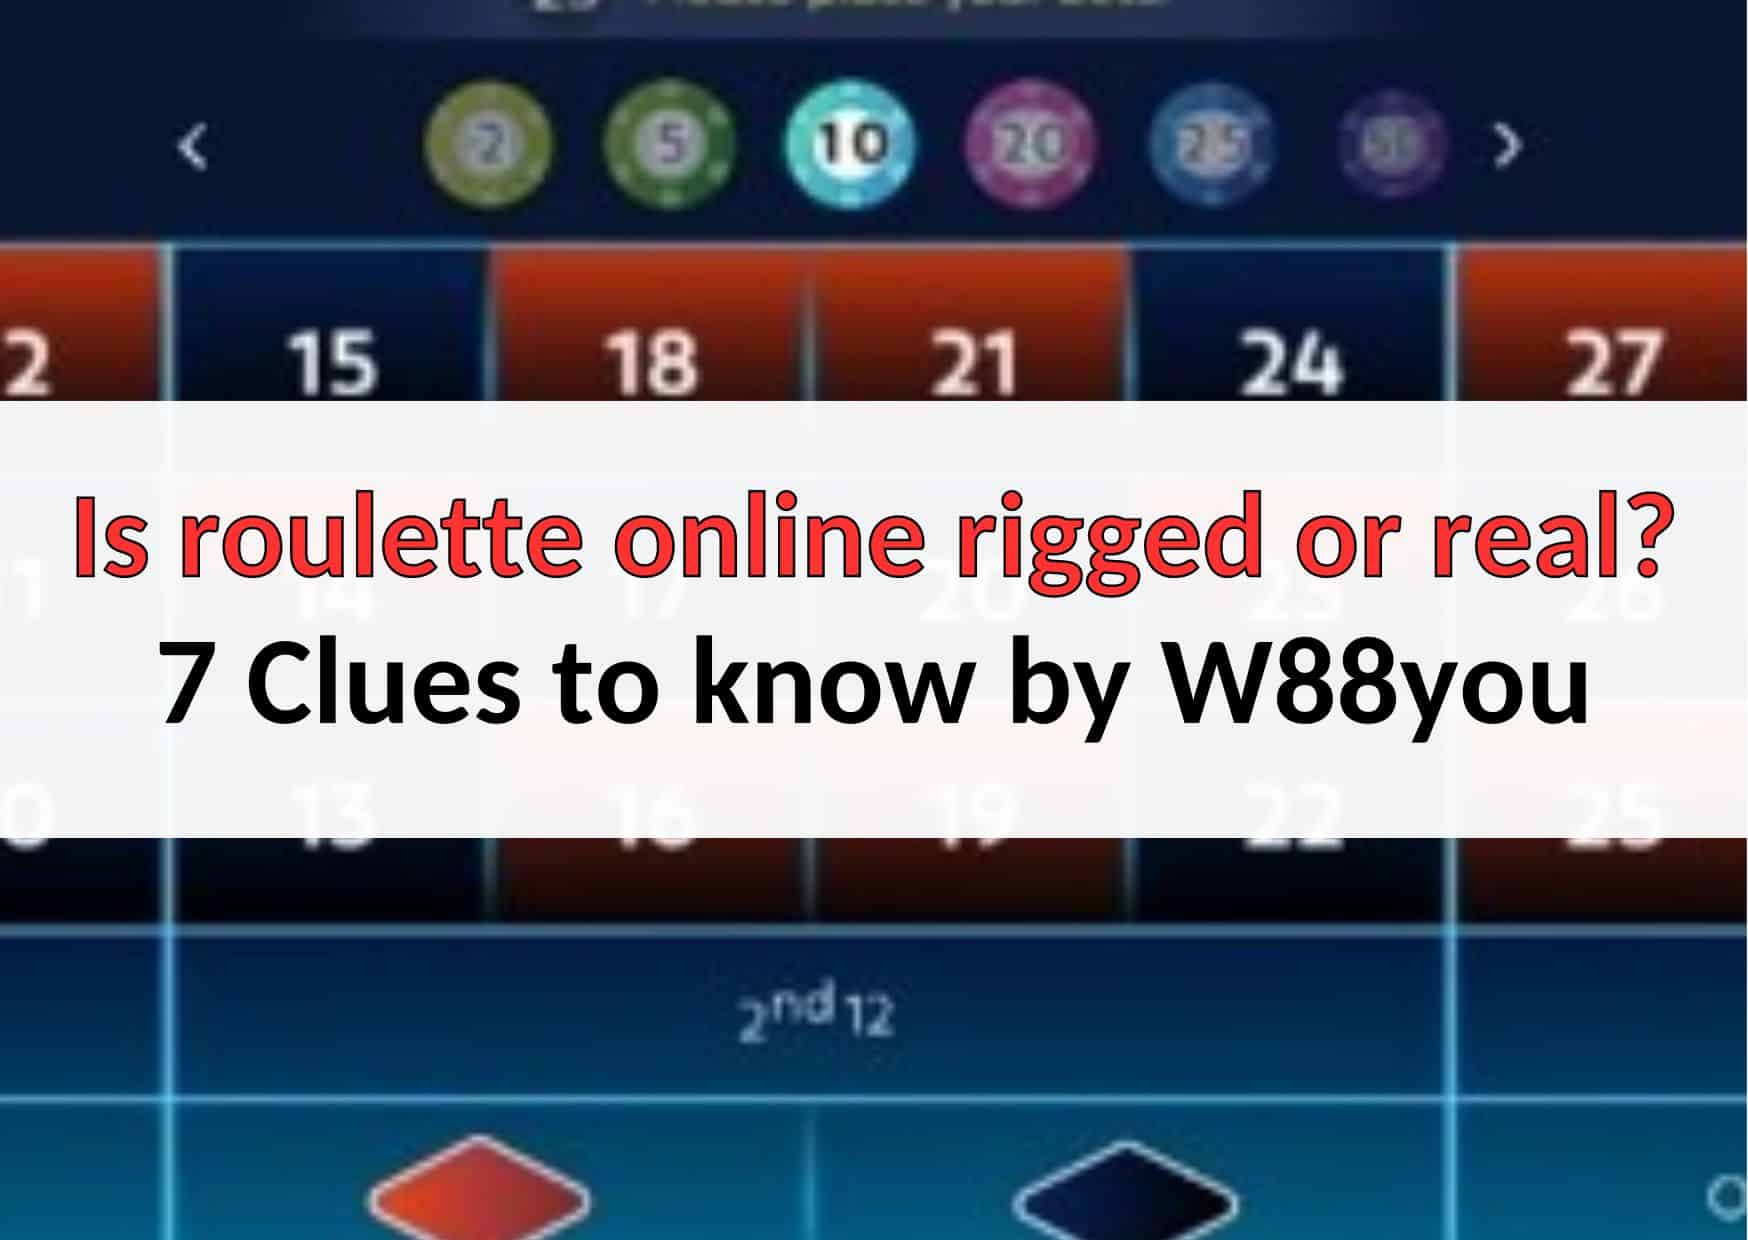 is roulette online rigged or real